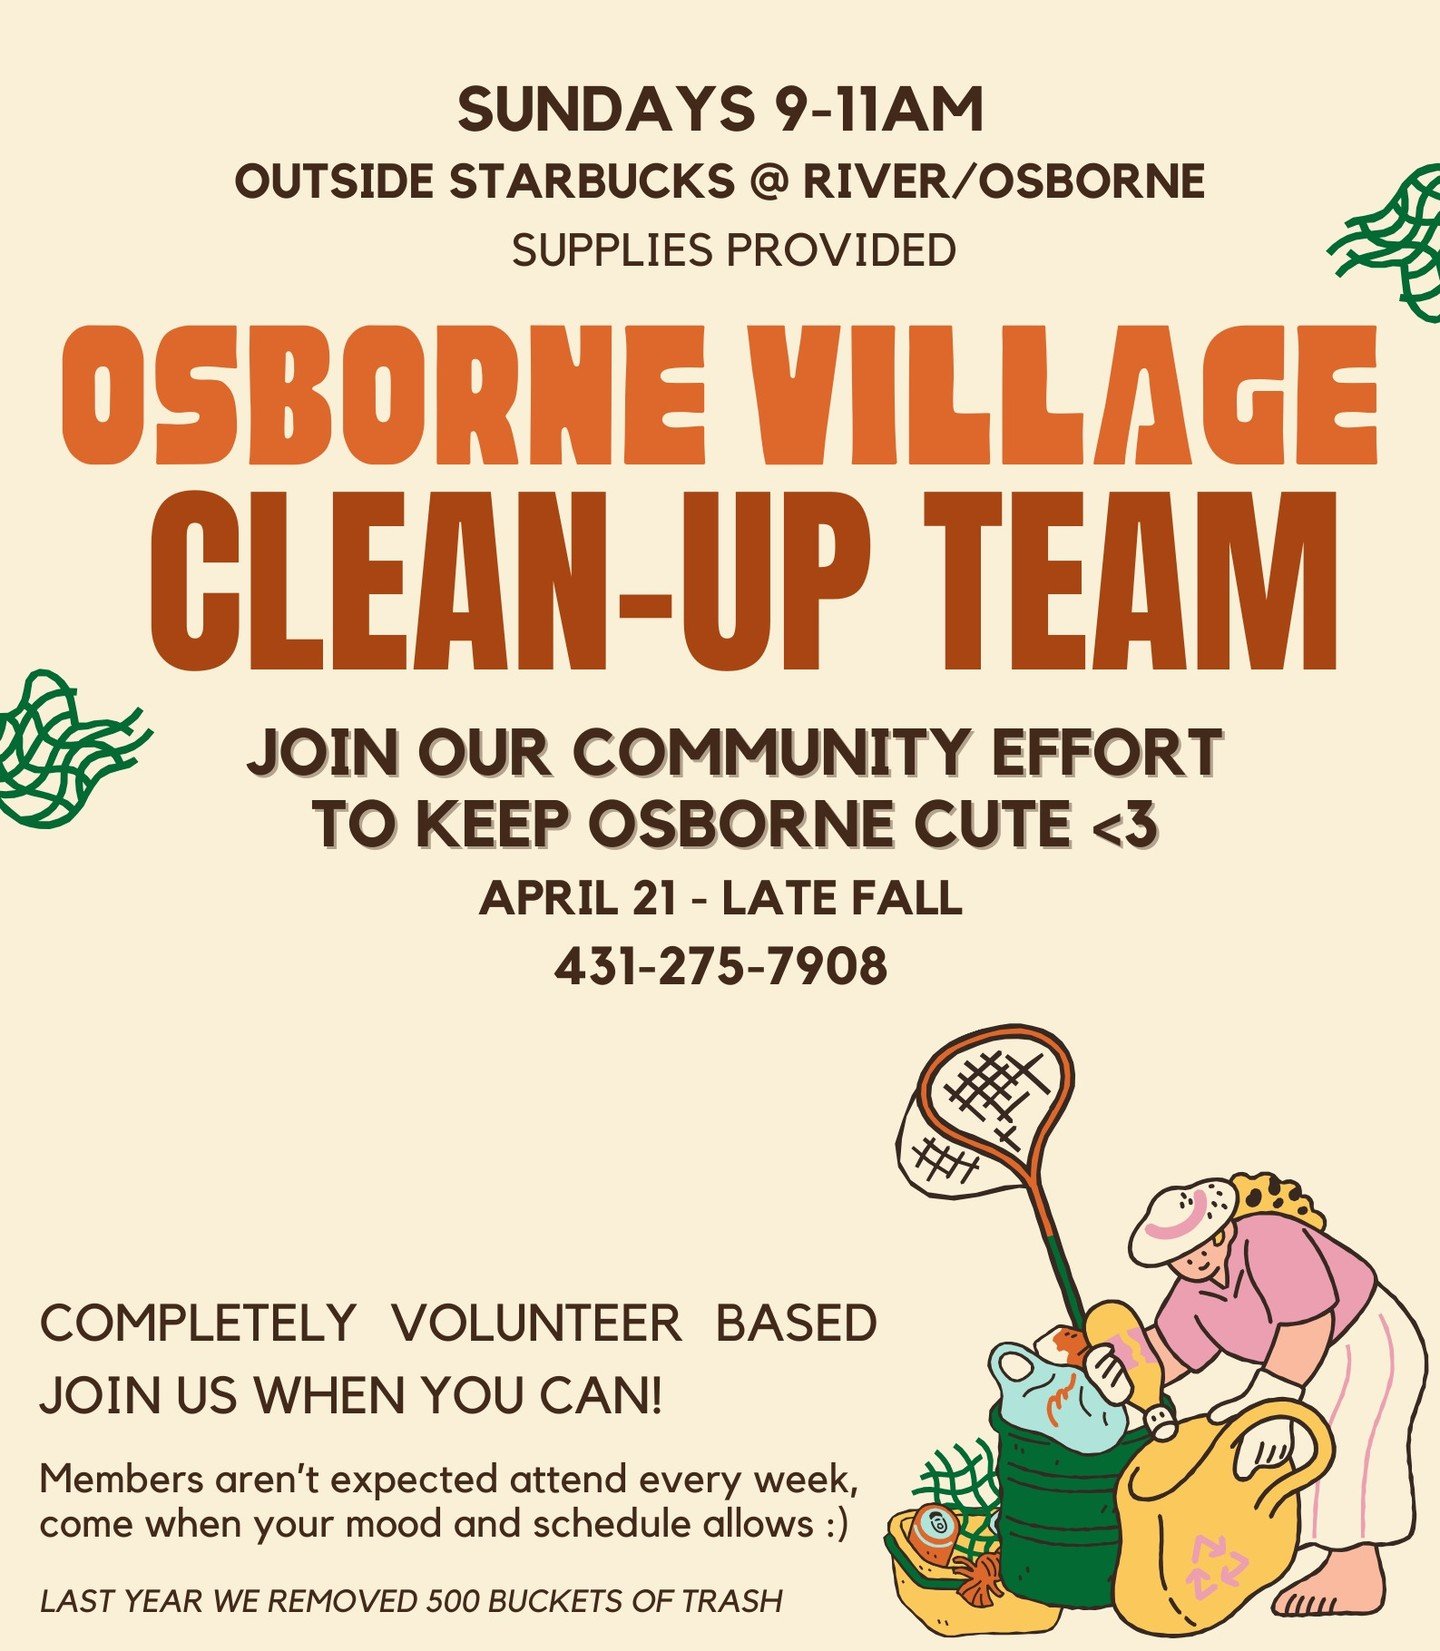 THIS SUNDAY💫 Join your community for the first Sunday clean up of the year! This team was founded and continues to run on a complete volunteer basis. We are so so grateful to have a community invested in keeping our block safe, clean, fun and fresh 